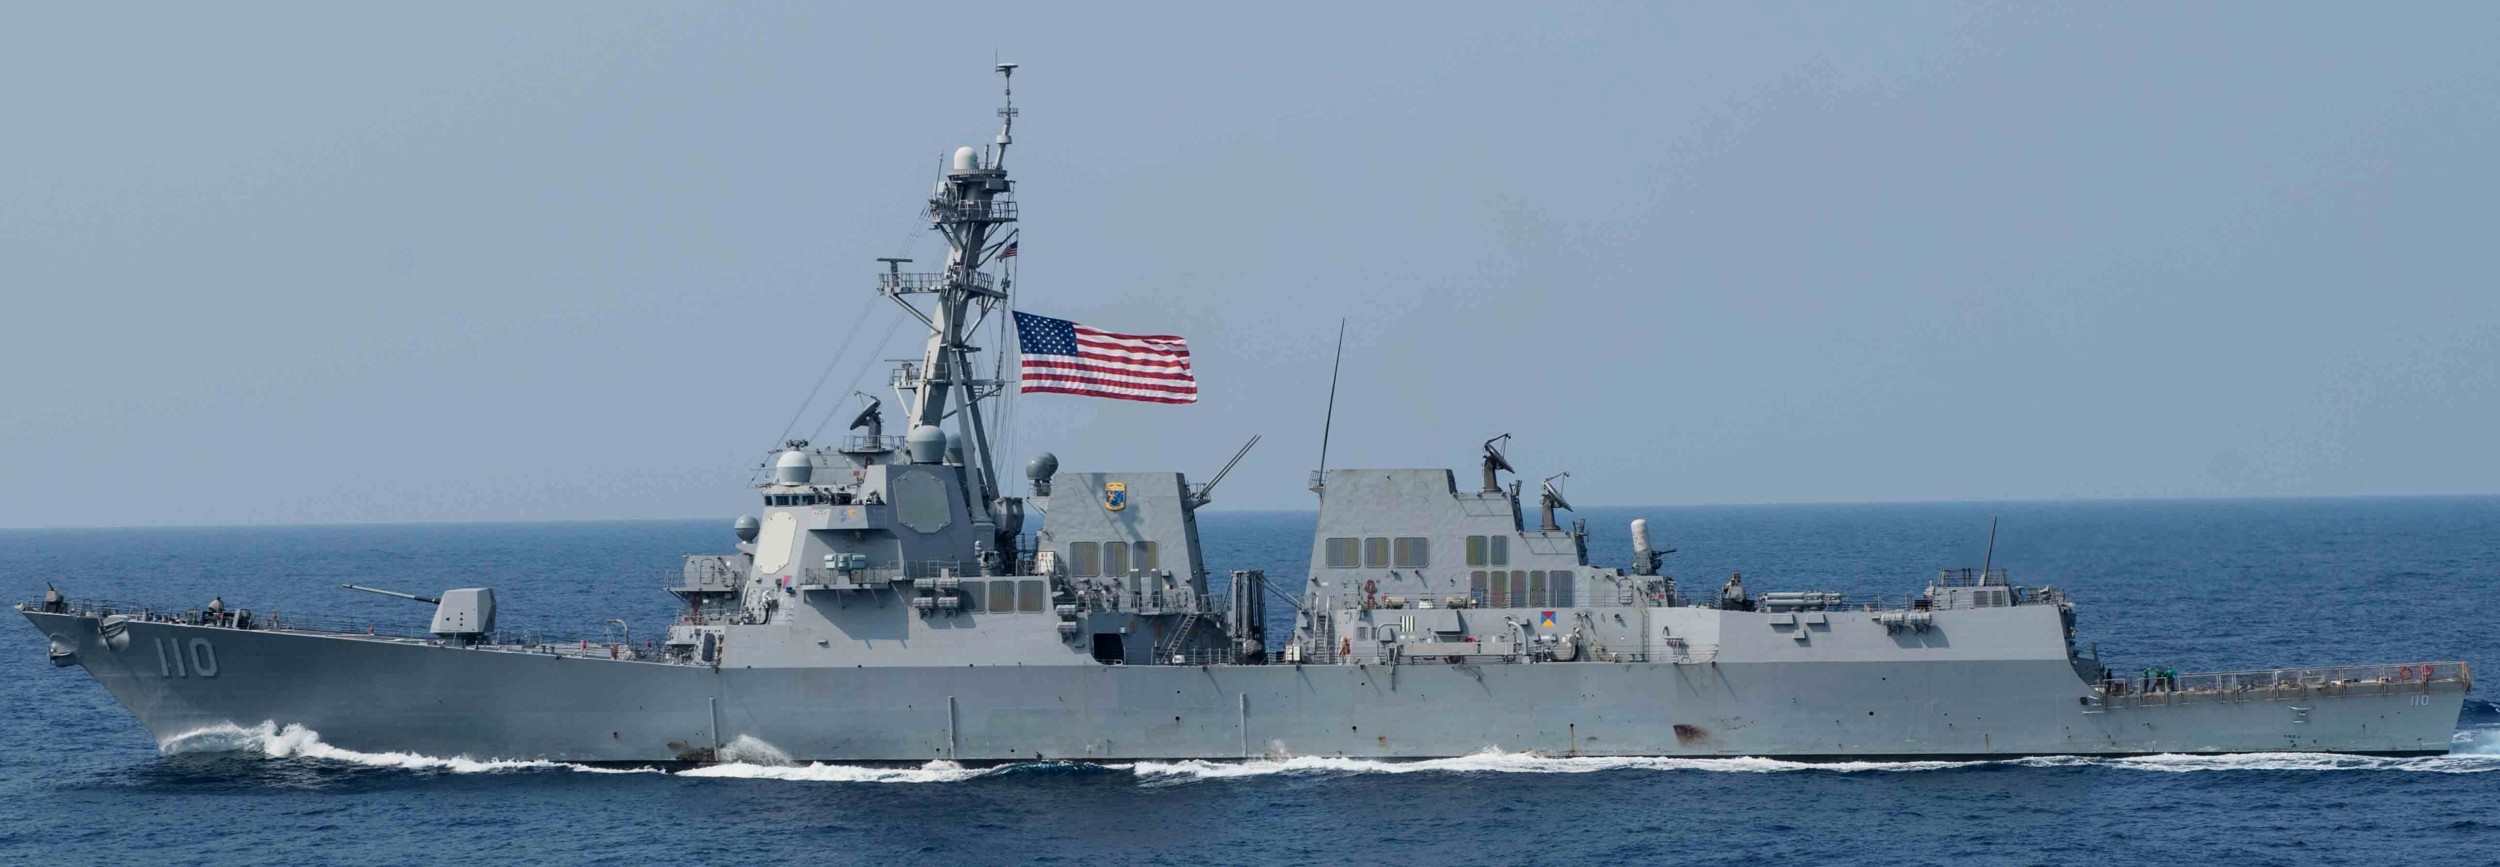 ddg-110 uss william p. lawrence arleigh burke class guided missile destroyer aegis us navy 20